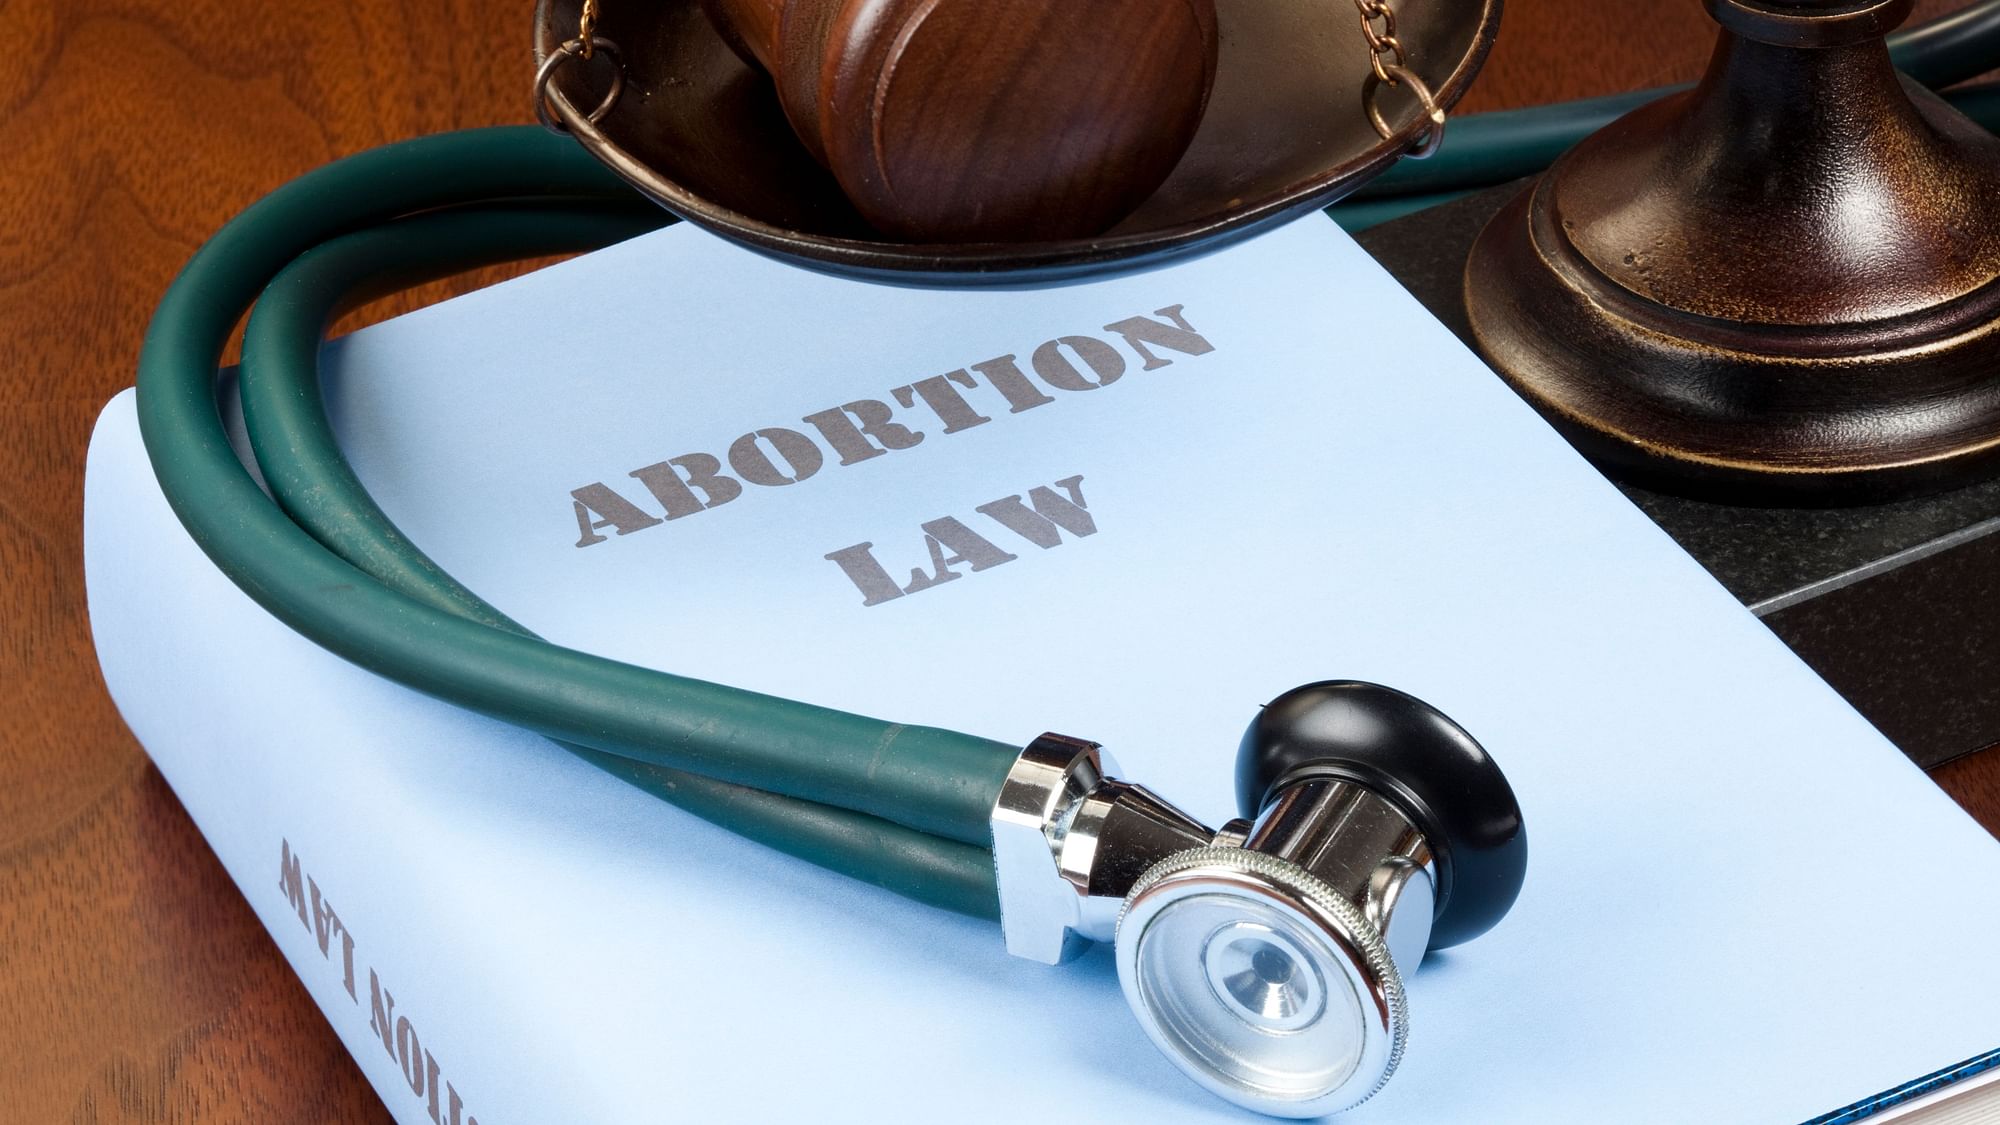 Under the proposed law, a woman will have access to an abortion until 20 weeks’ pregnancy and would only require a medical examination after that.